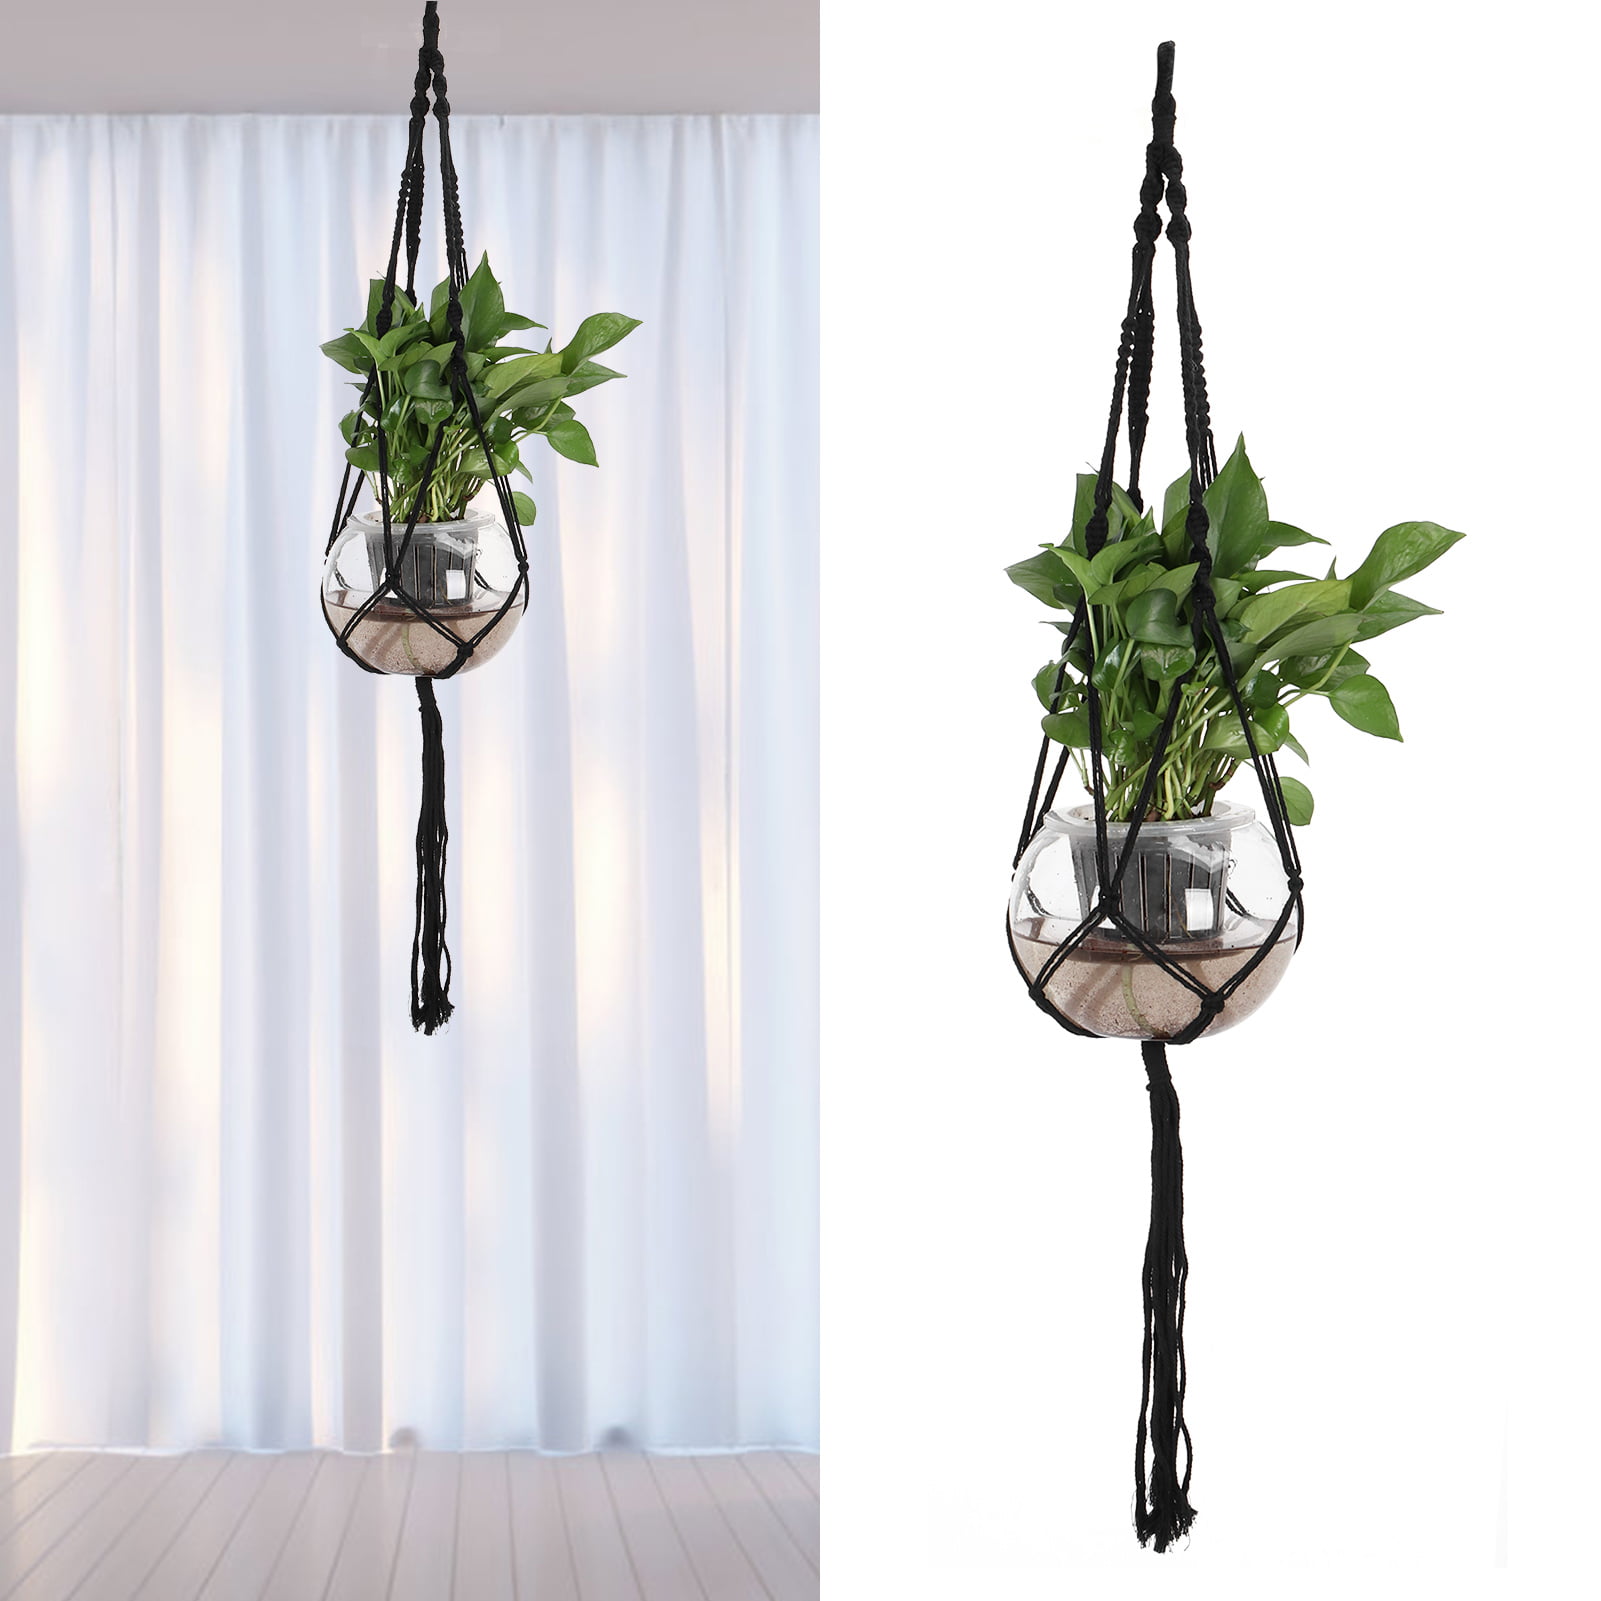 Home Garden Patio Houseplant Braided Rope Hanging Hanger for Plant Pot 97cm 